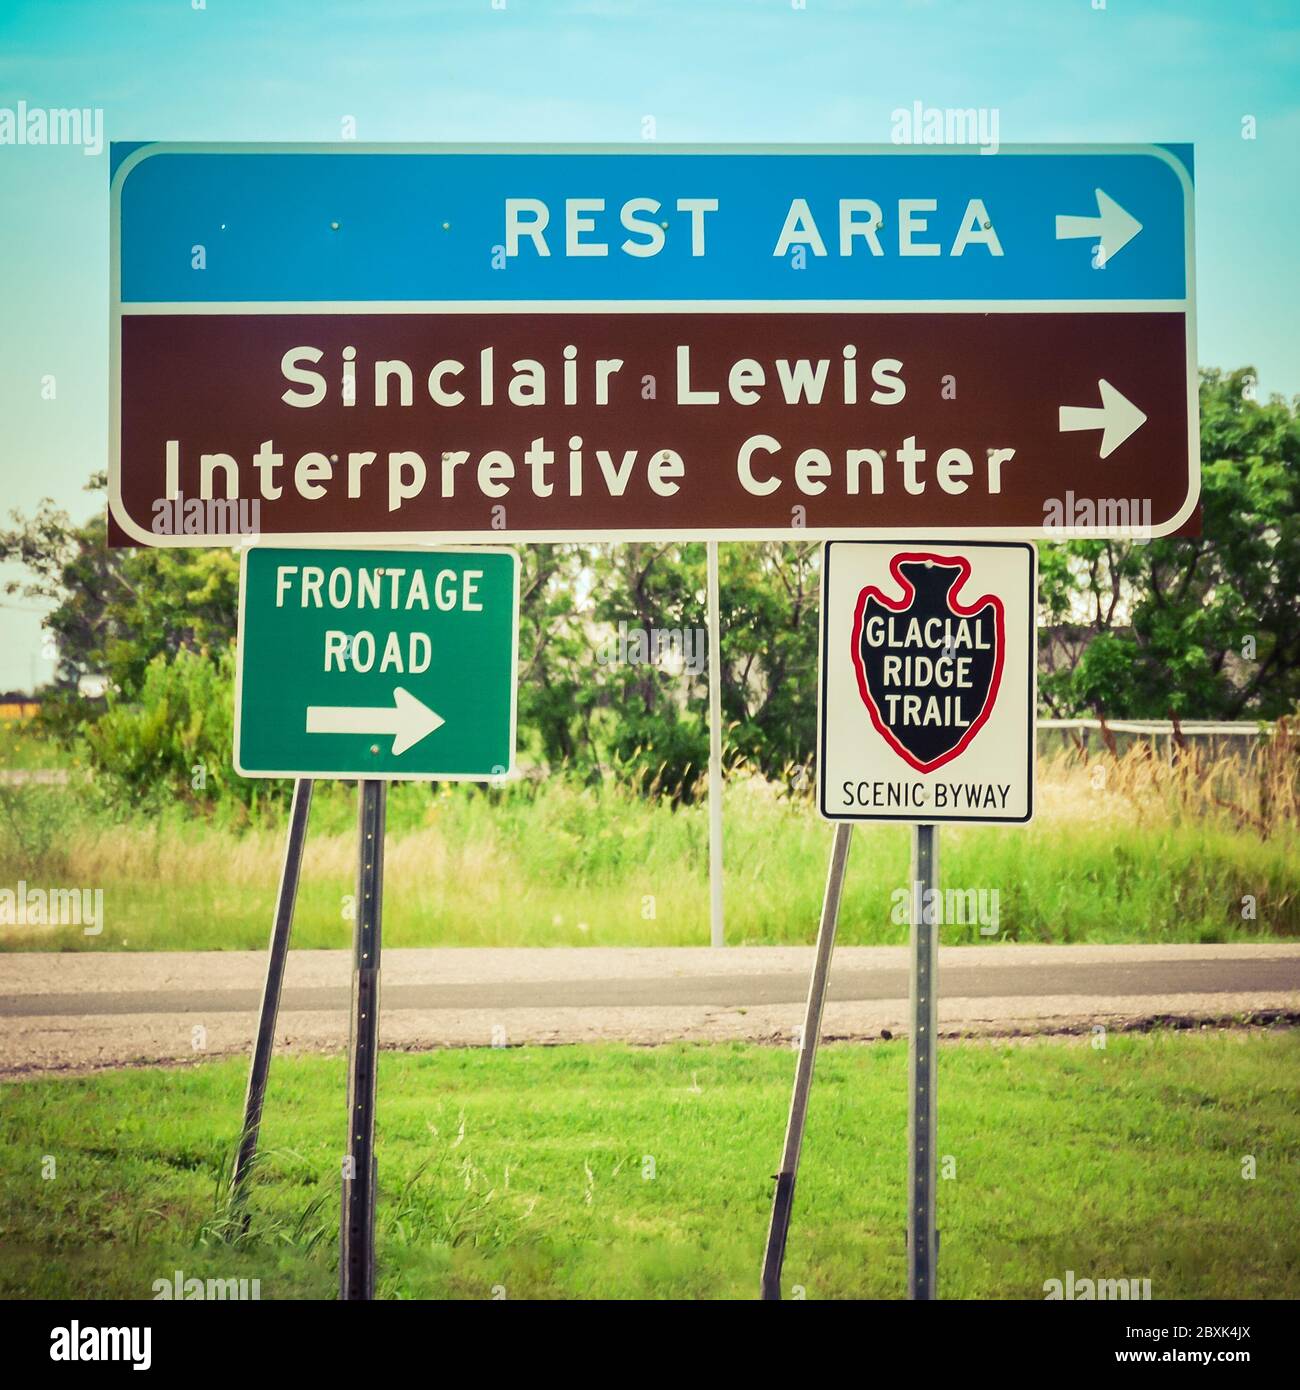 A collection of road signs for a Rest area, a frontage road, the Glacial Ridge Trail, a scenic highway and the Sinclair Lewis Interpretive Center, MN Stock Photo